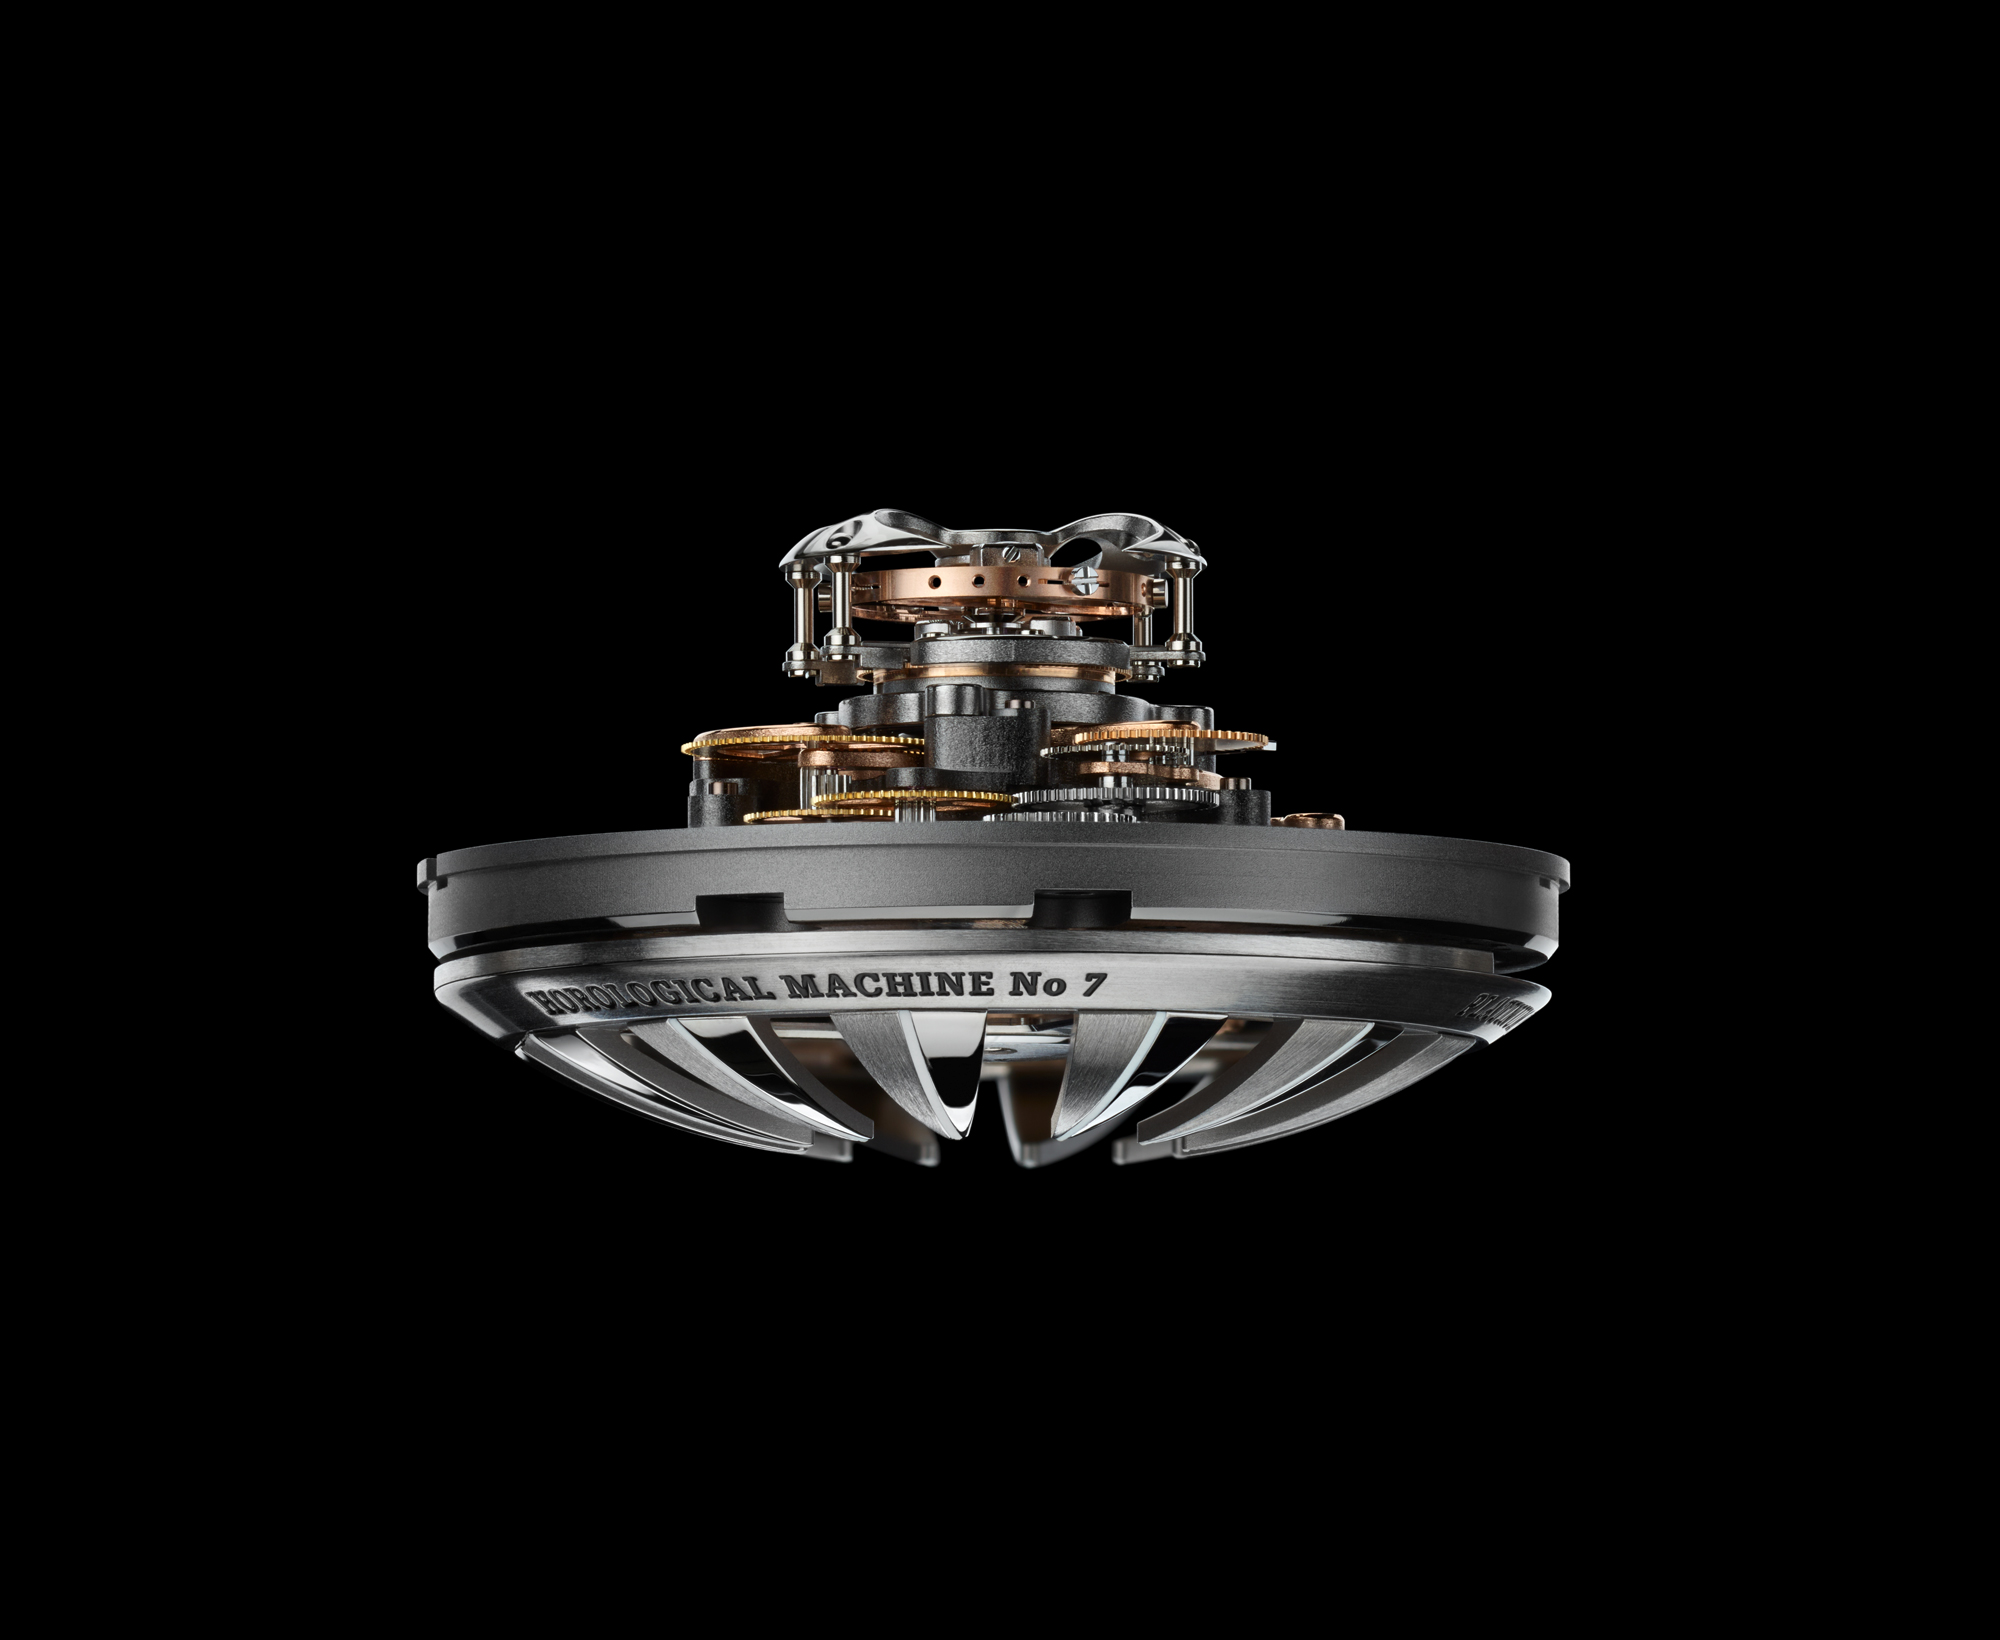 While HM7 Aquapod is as contemporary as could be, the concept of the three-dimensional, spherical movement architecture is centuries old, originating in the “onion” pocket watches popular in the 18th century. Whereas the majority of watch movements are developed horizontally to be as flat as possible, the Engine of HM7 goes up, not out, with all of its components arranged vertically. The movement of HM7 was entirely developed in-house by MB&F.